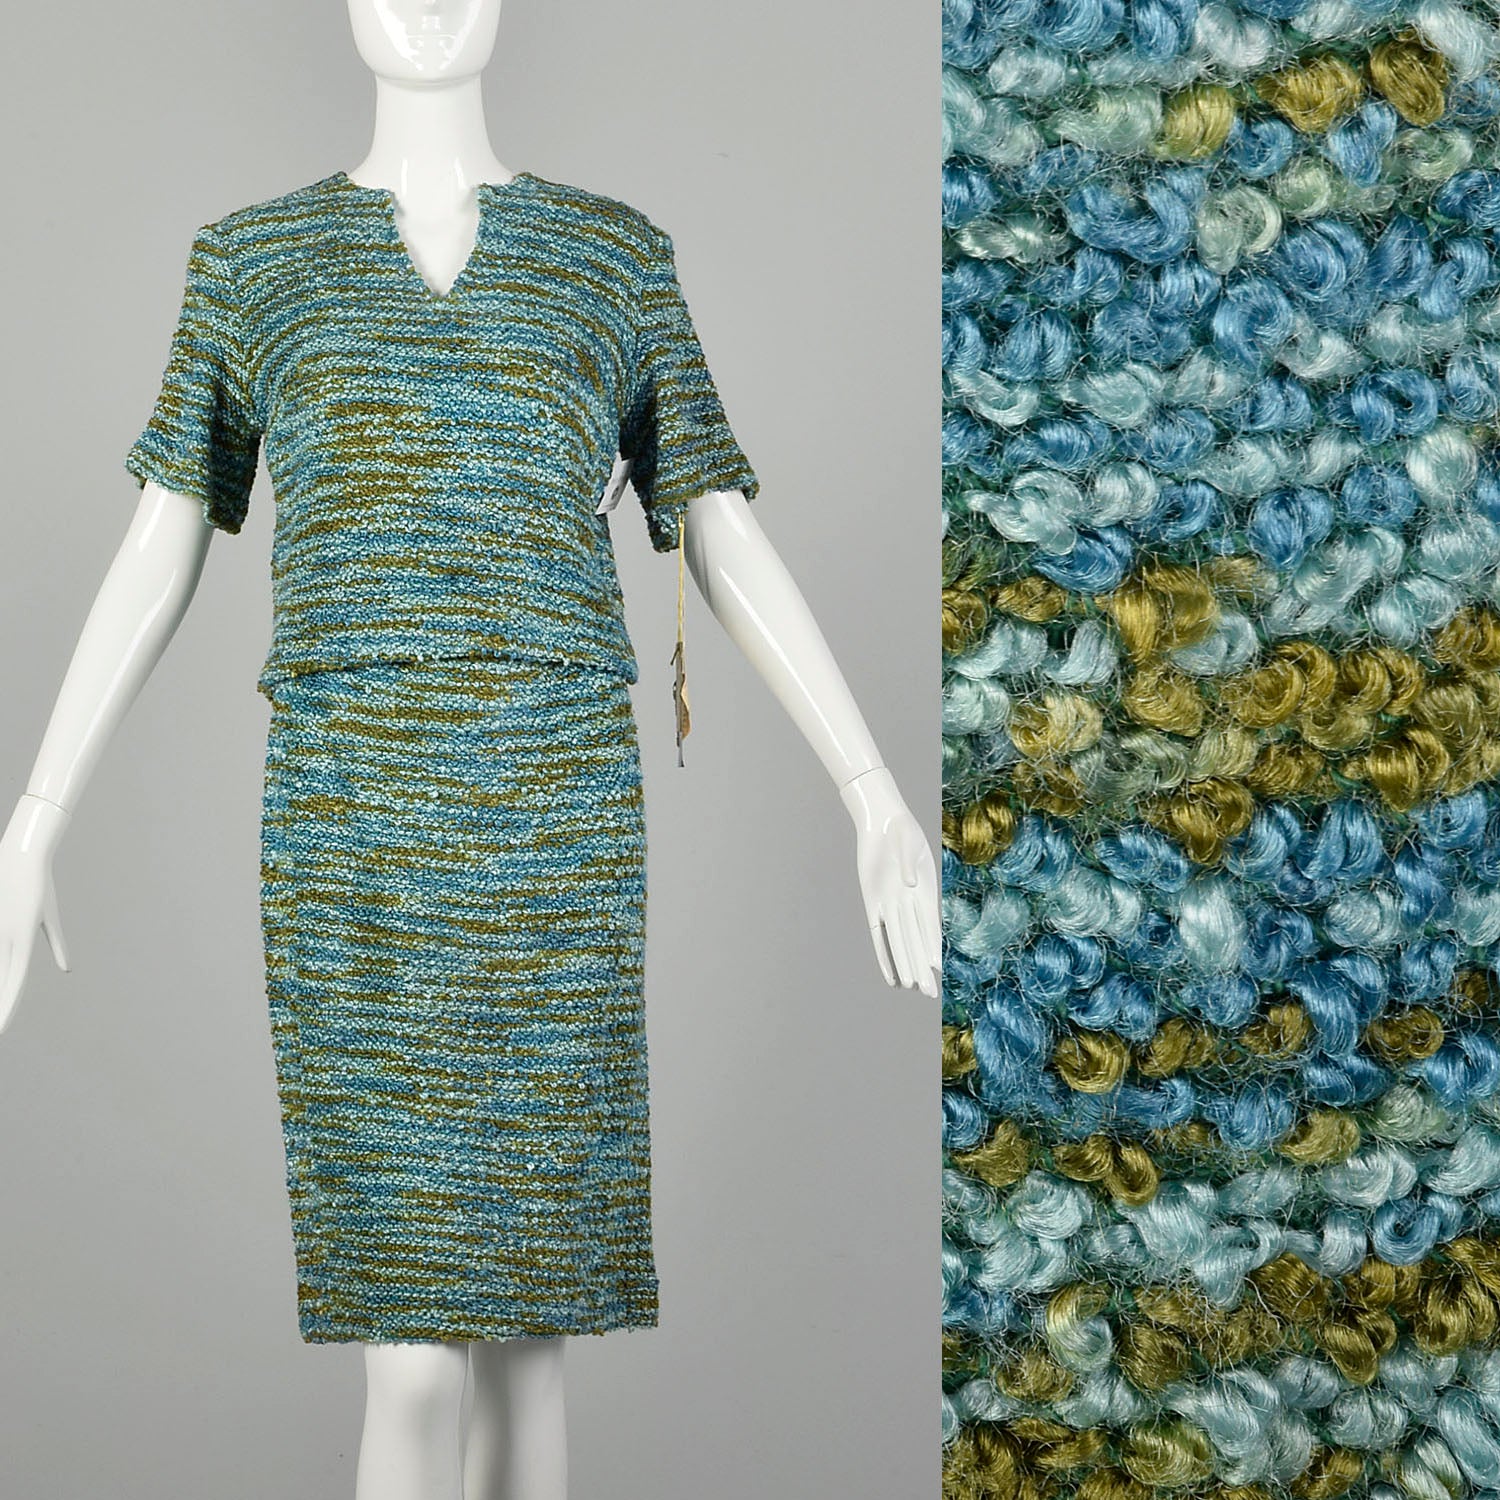 Small 1960s Knit Boucle Skirt Set Skirt Top Separates